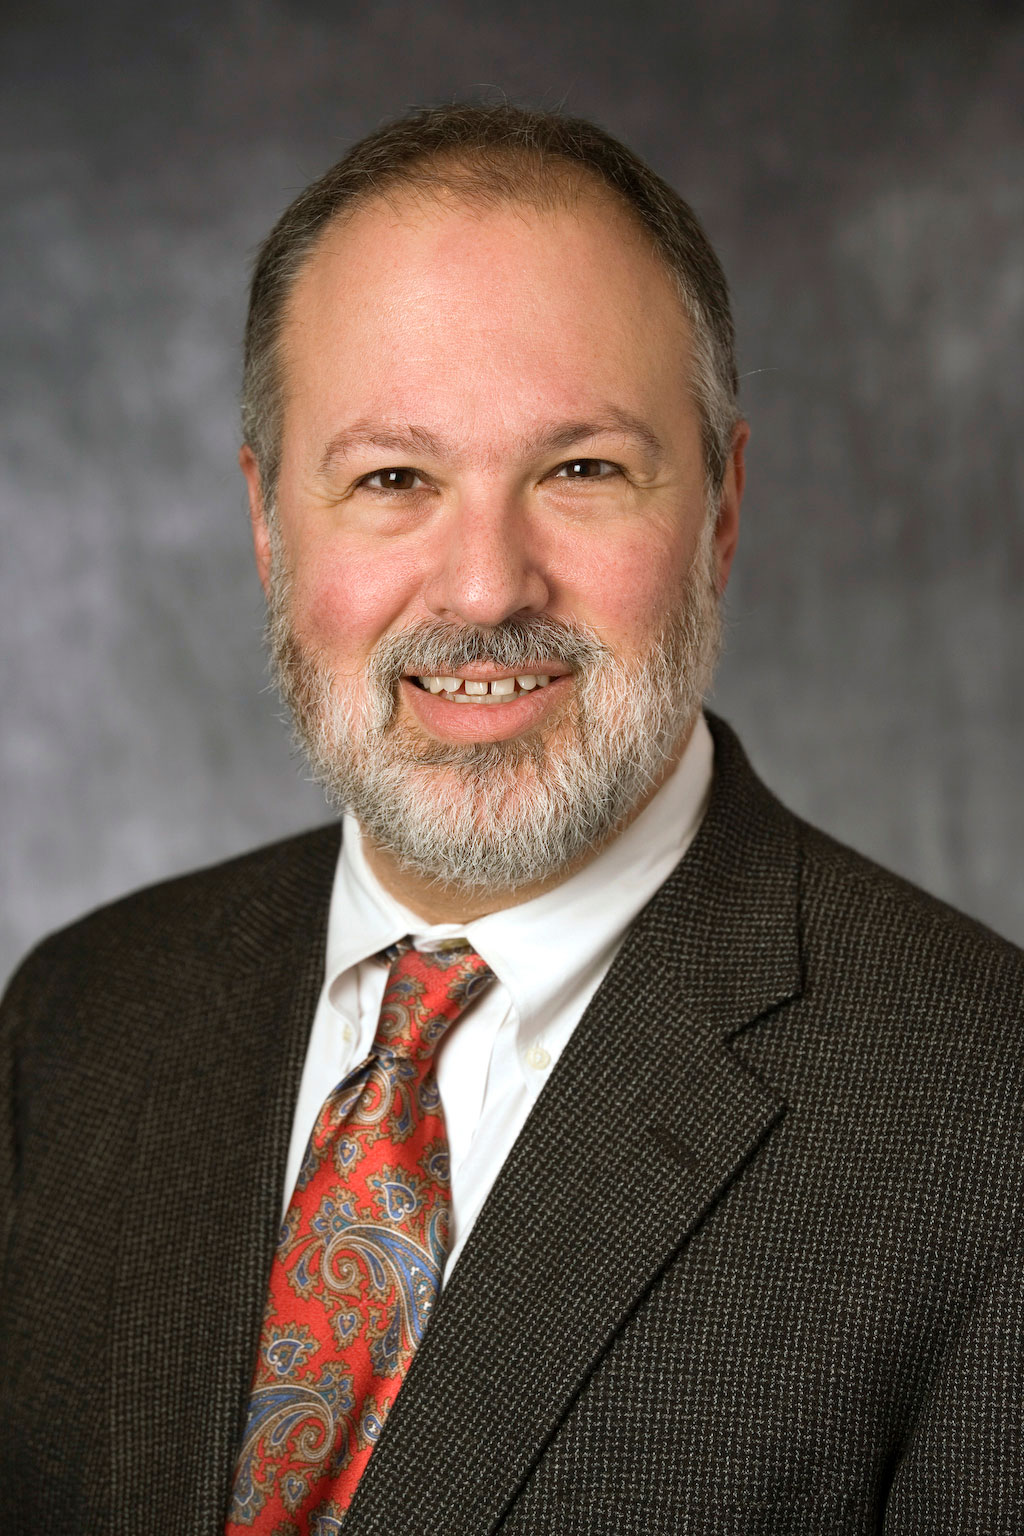 Robert Ronis, MD, MPH